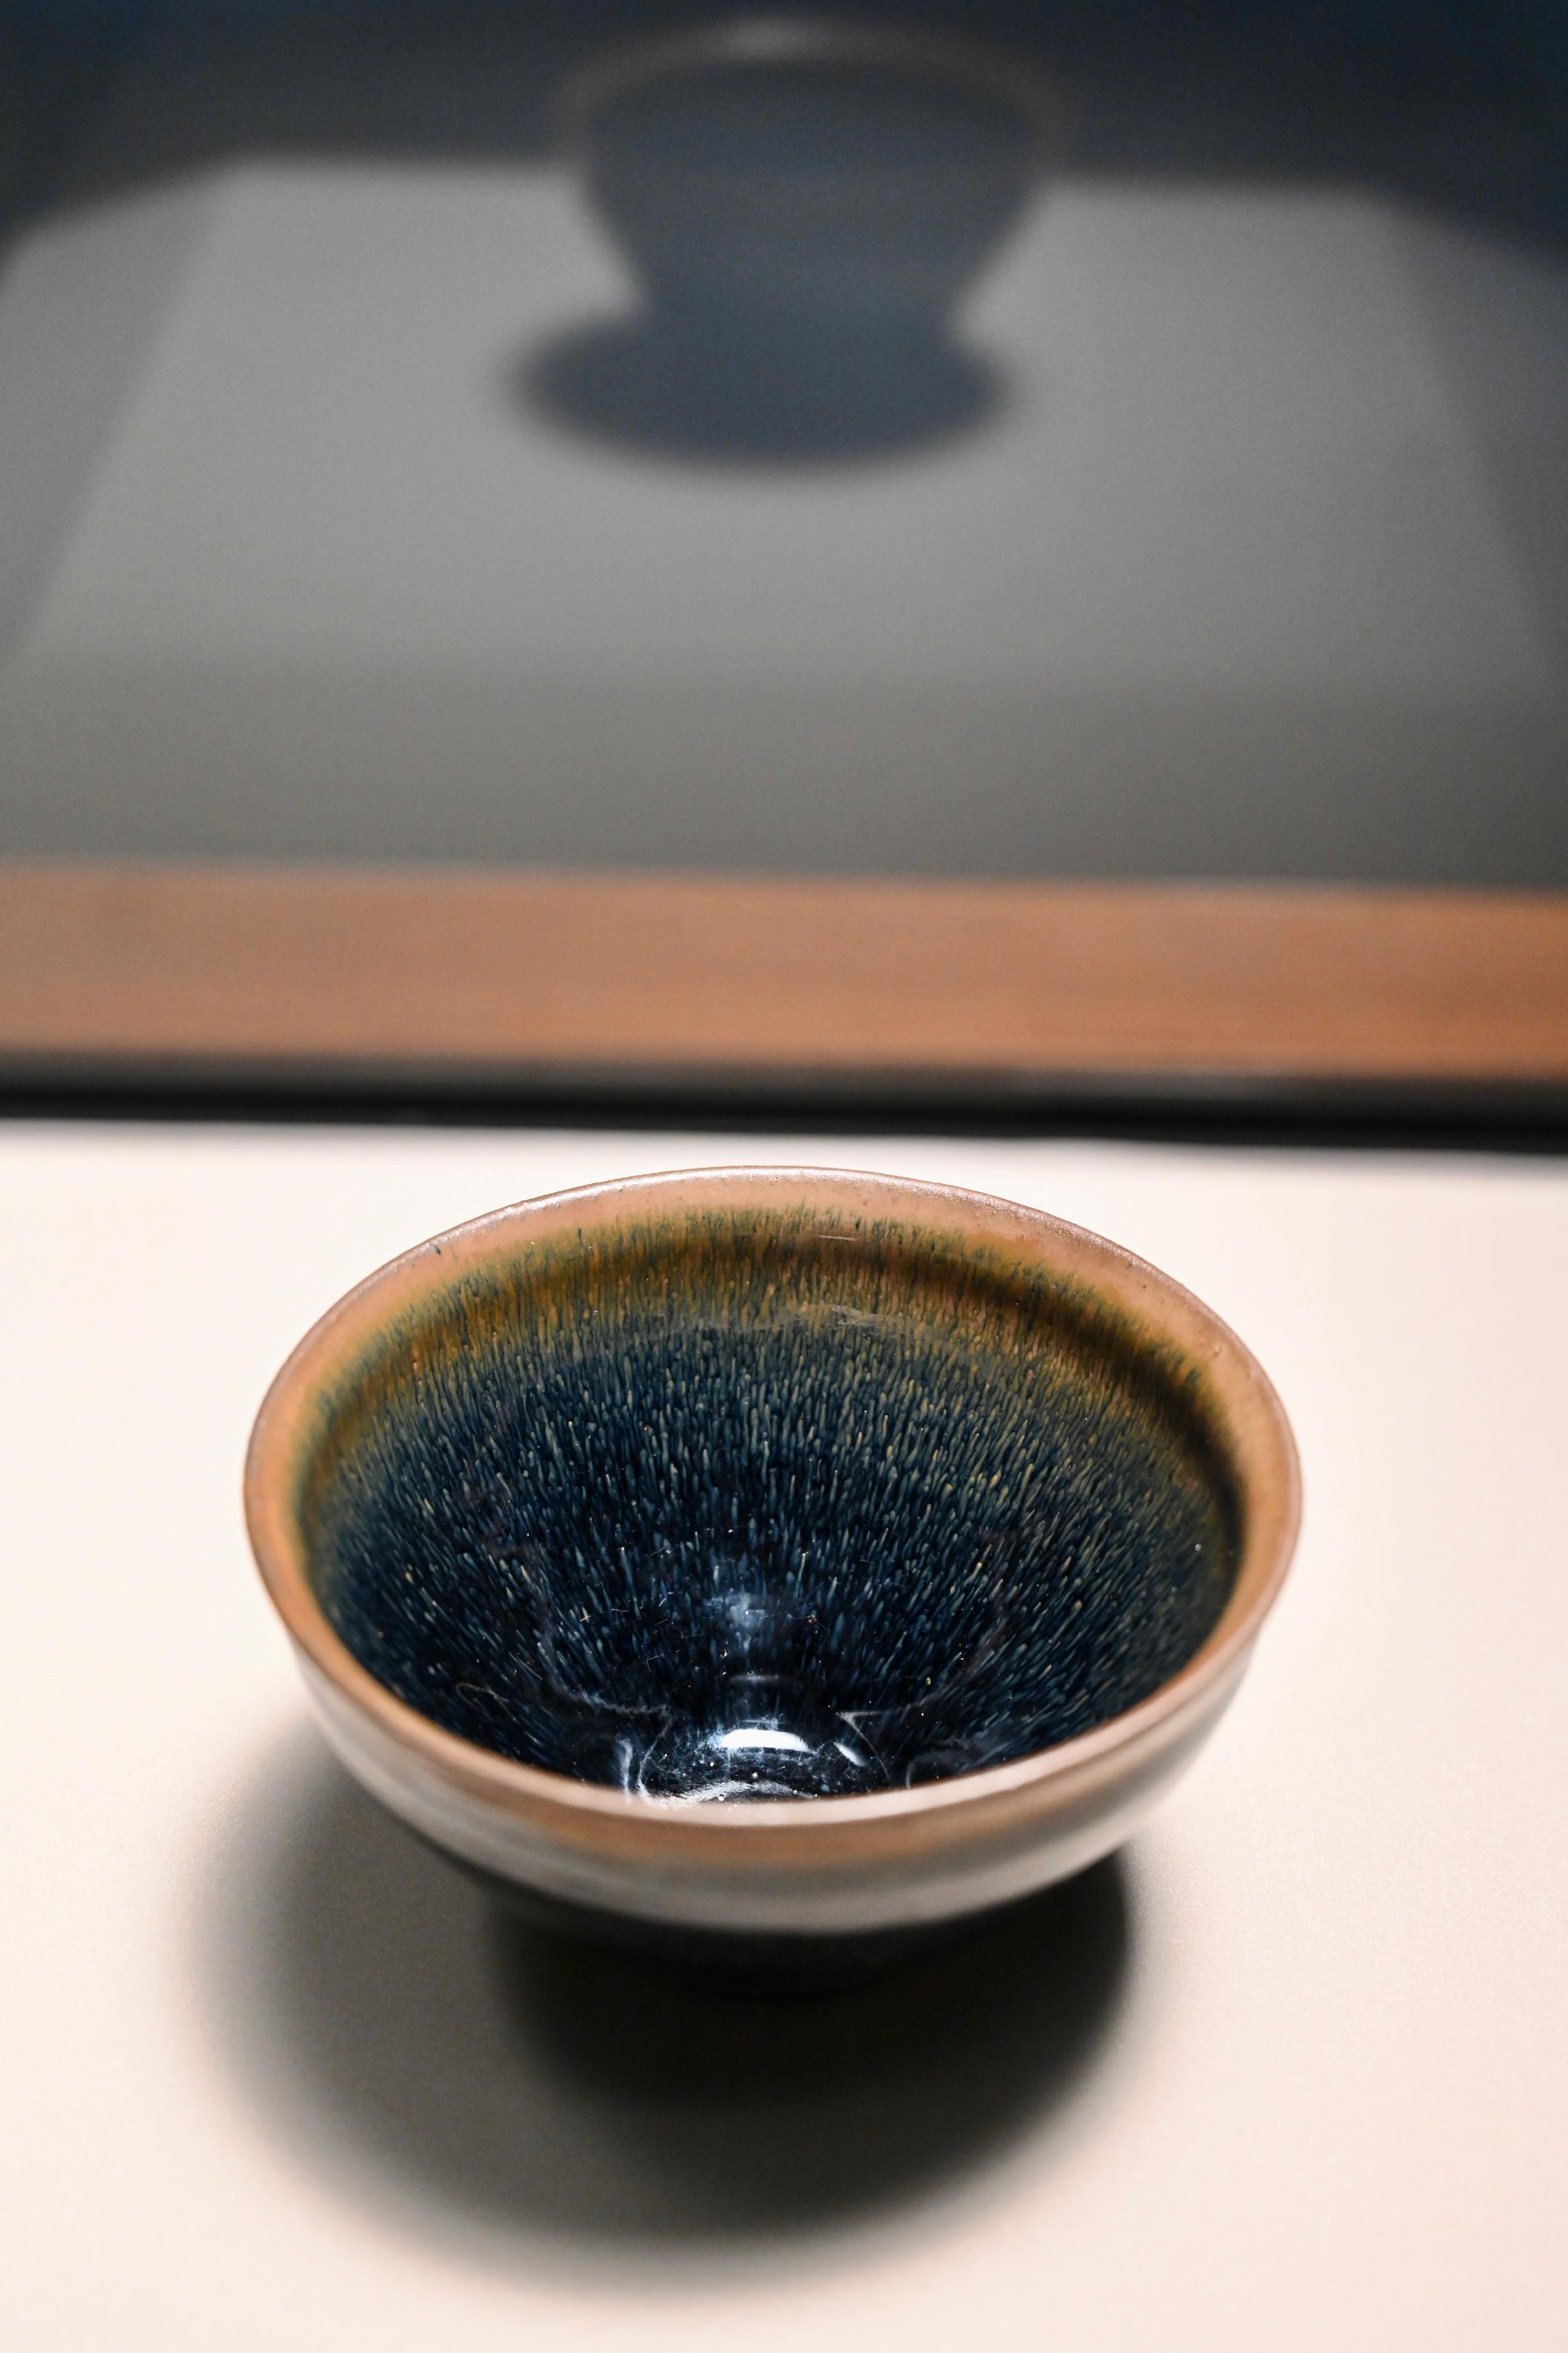 "Art Personalised: Masterpieces from the Hong Kong Museum of Art" exhibition will be held at the Hong Kong Museum of Art from tomorrow (June 30). Picture shows a tea bowl with hare's fur striations in black glaze, Jianyang ware in Fujian from the Northern Song dynasty, which is on display in the "Elegance" exhibition zone.